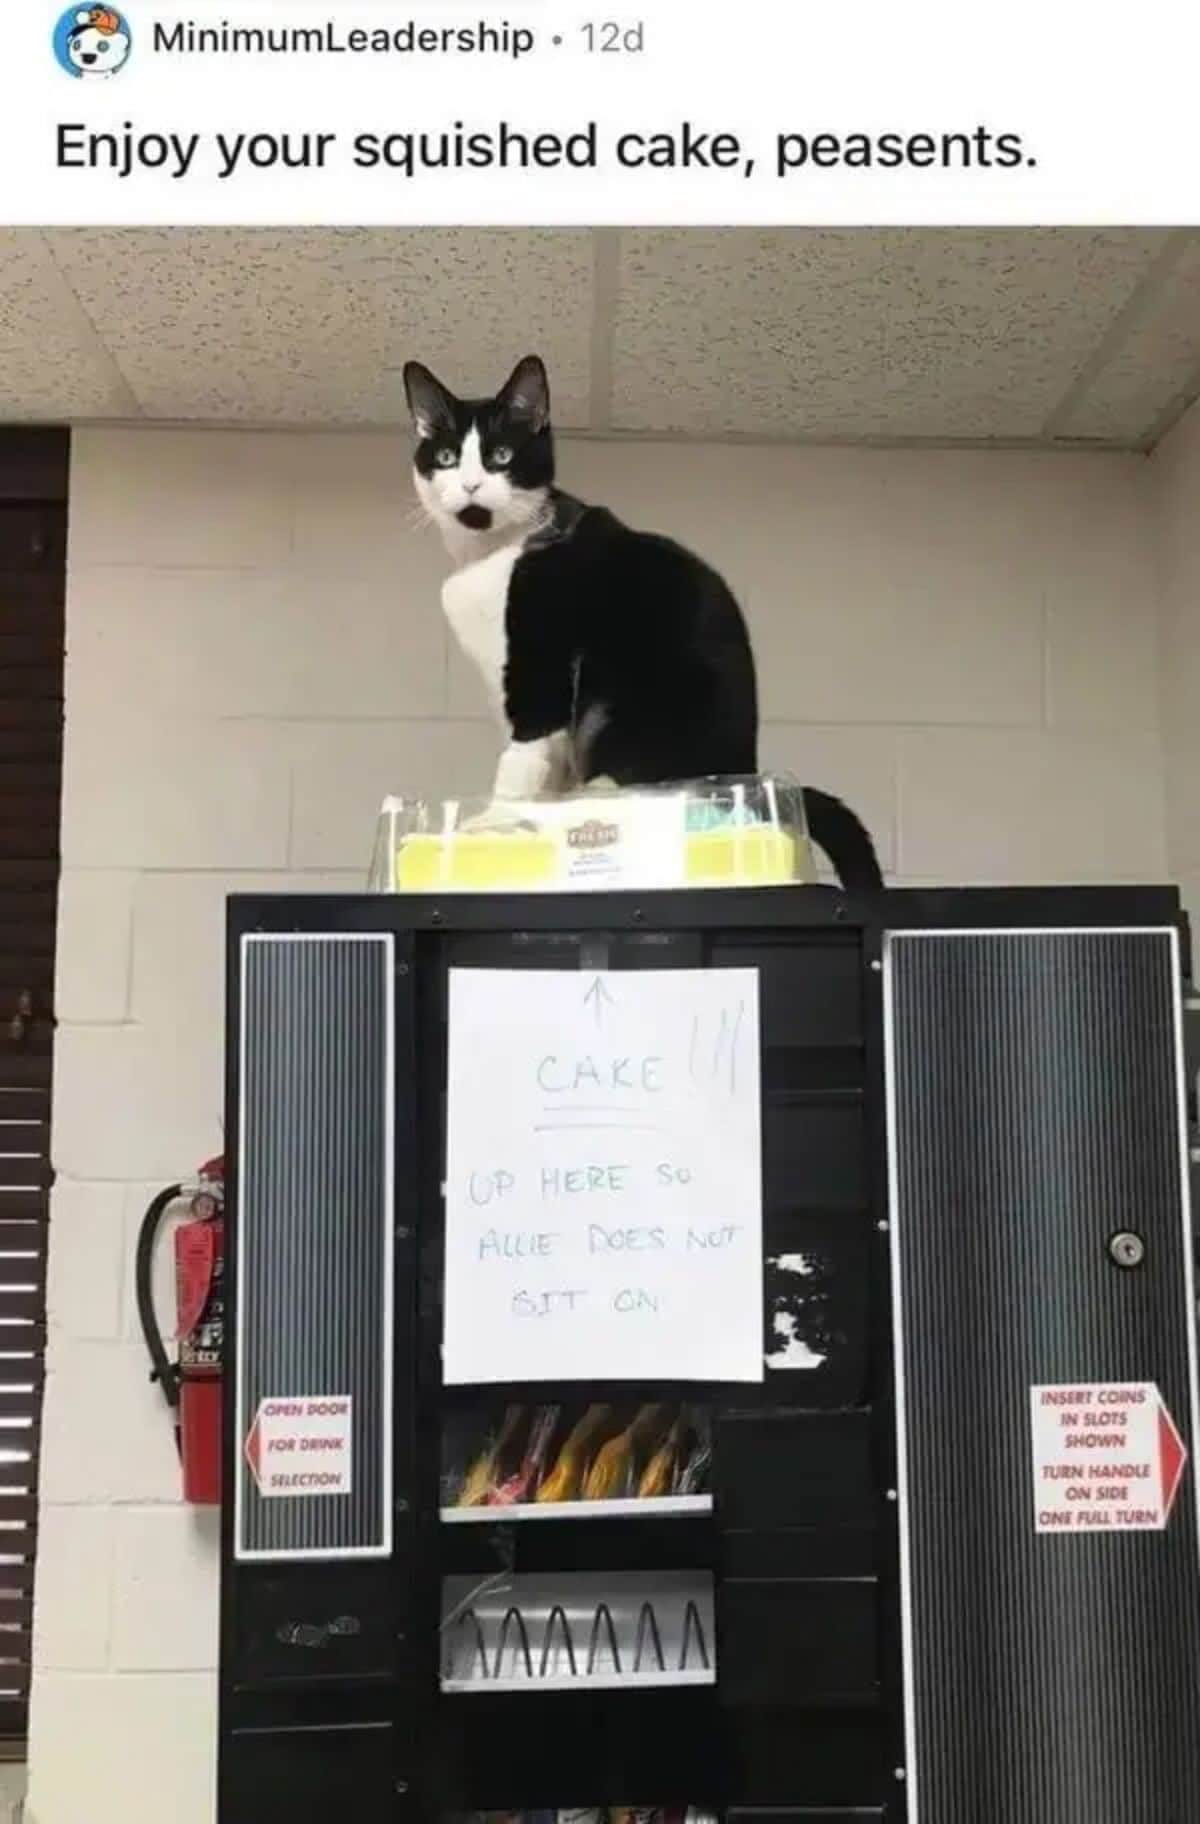 black and white cat sitting on a yellow cake in a plastic box placed on a black vending machine